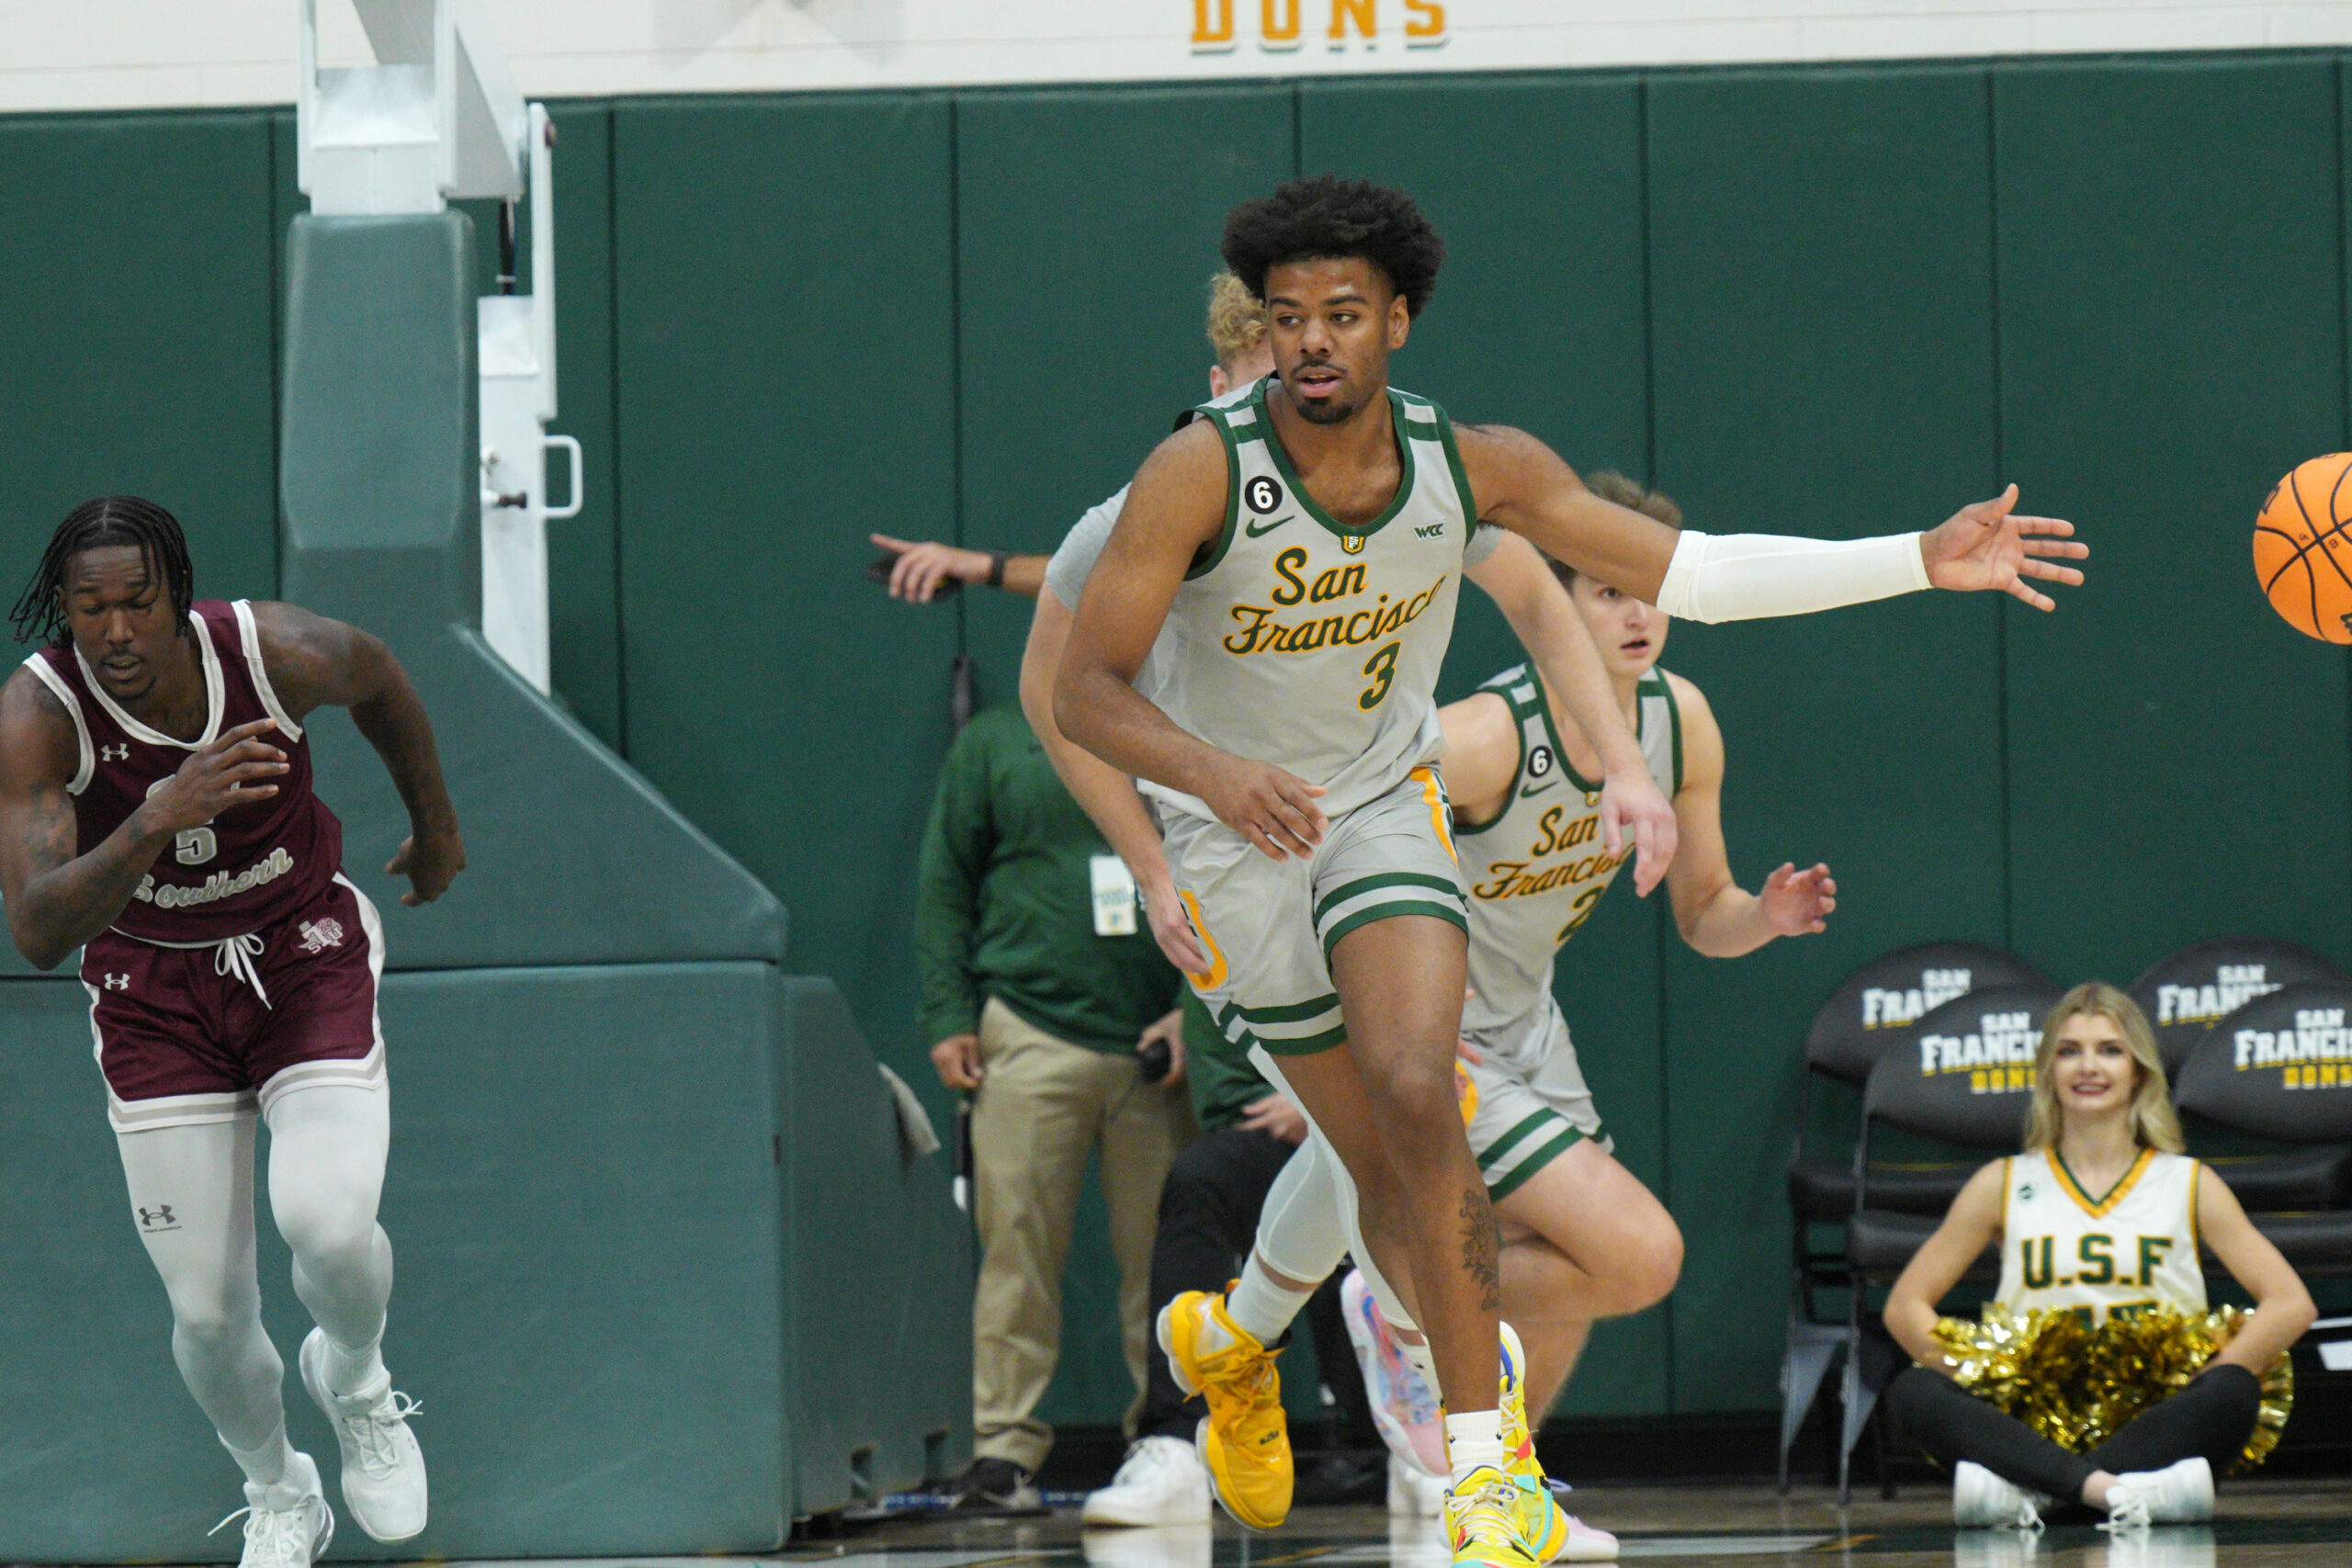 USF basketball player spends three years on bench. Now he’s a top defender